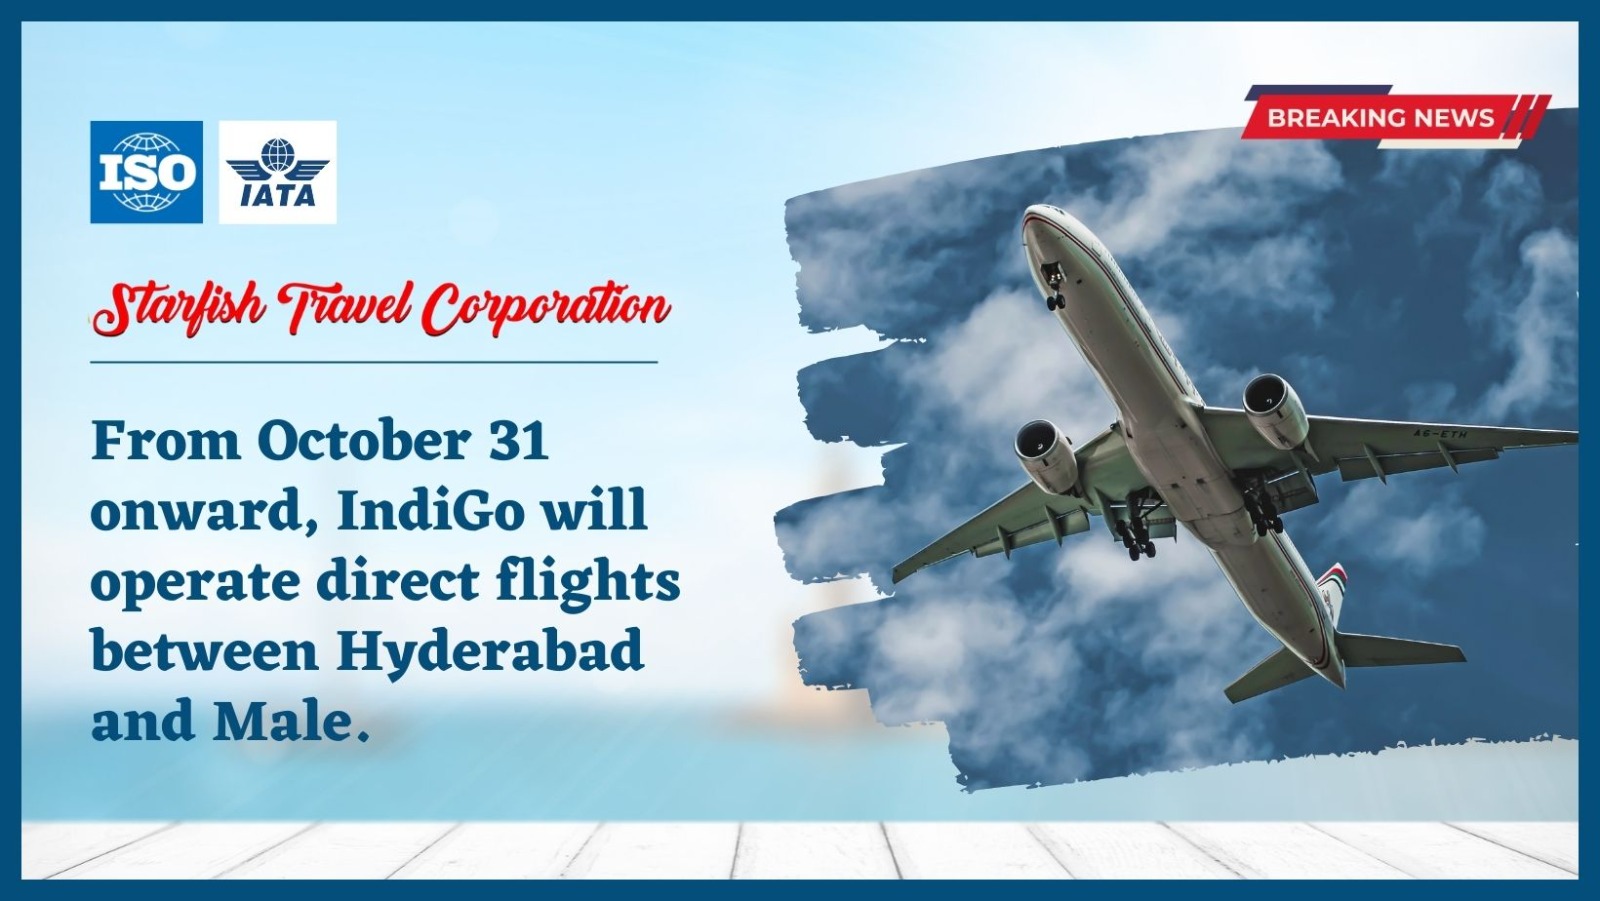 From October 31 onward, IndiGo will operate direct flights between Hyderabad and Male.